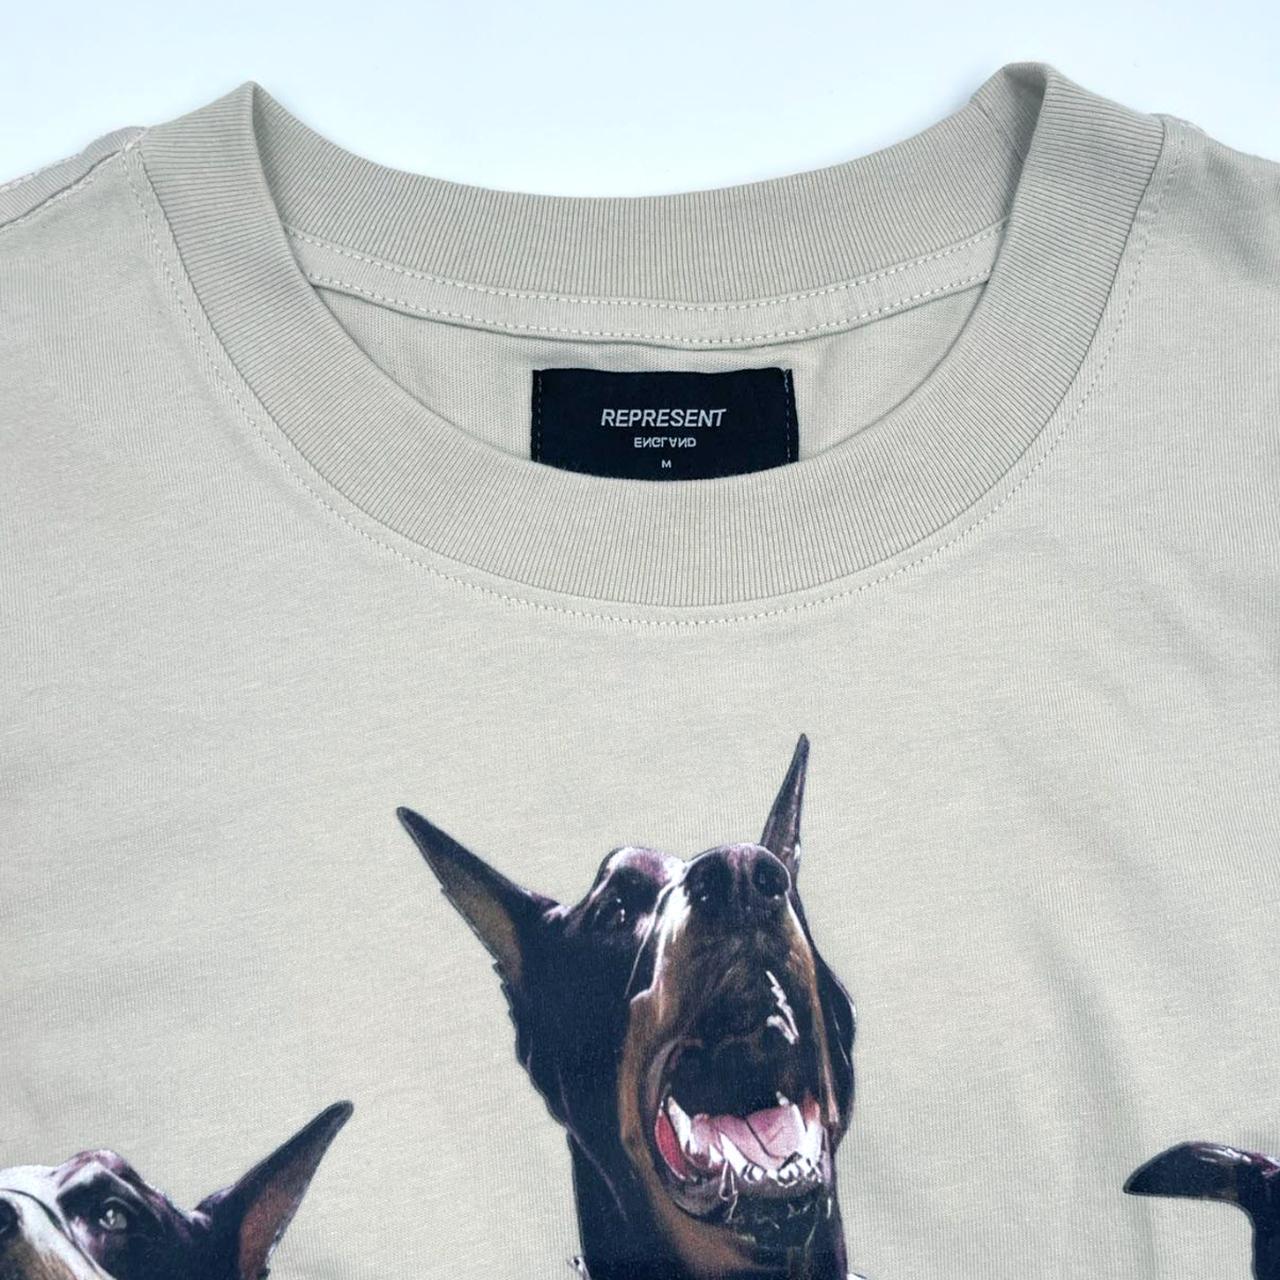 Product Image 3 - REPRESENT, Dobermann (Brand-New)

Made of cotton,